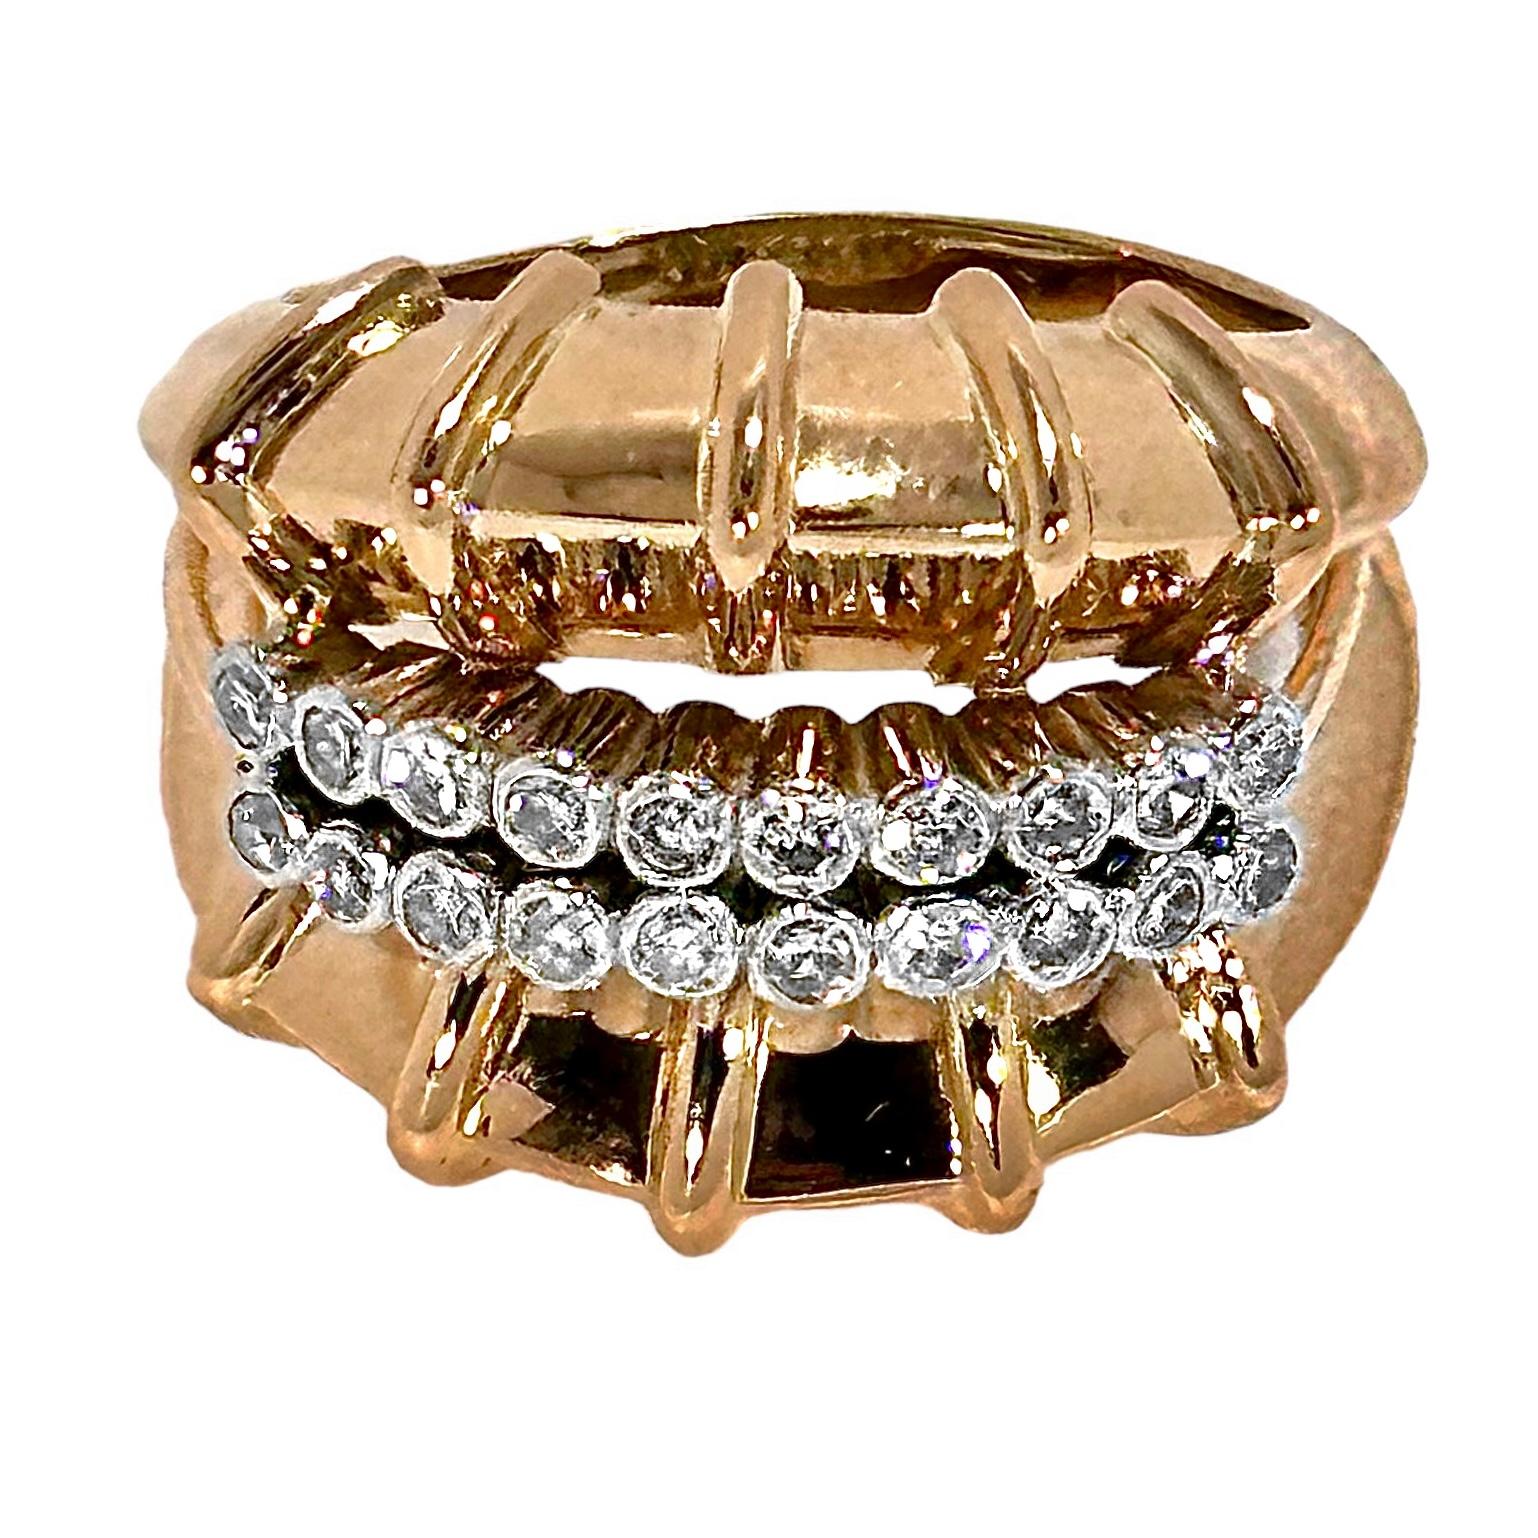 This dramatic and flamboyant Retro Period cocktail ring features twenty single cut diamonds set in platinum bezels, flanked by two very high knife edge ribbed panels. Total approximate diamond weight is .50ct, and overall quality is H/I color and